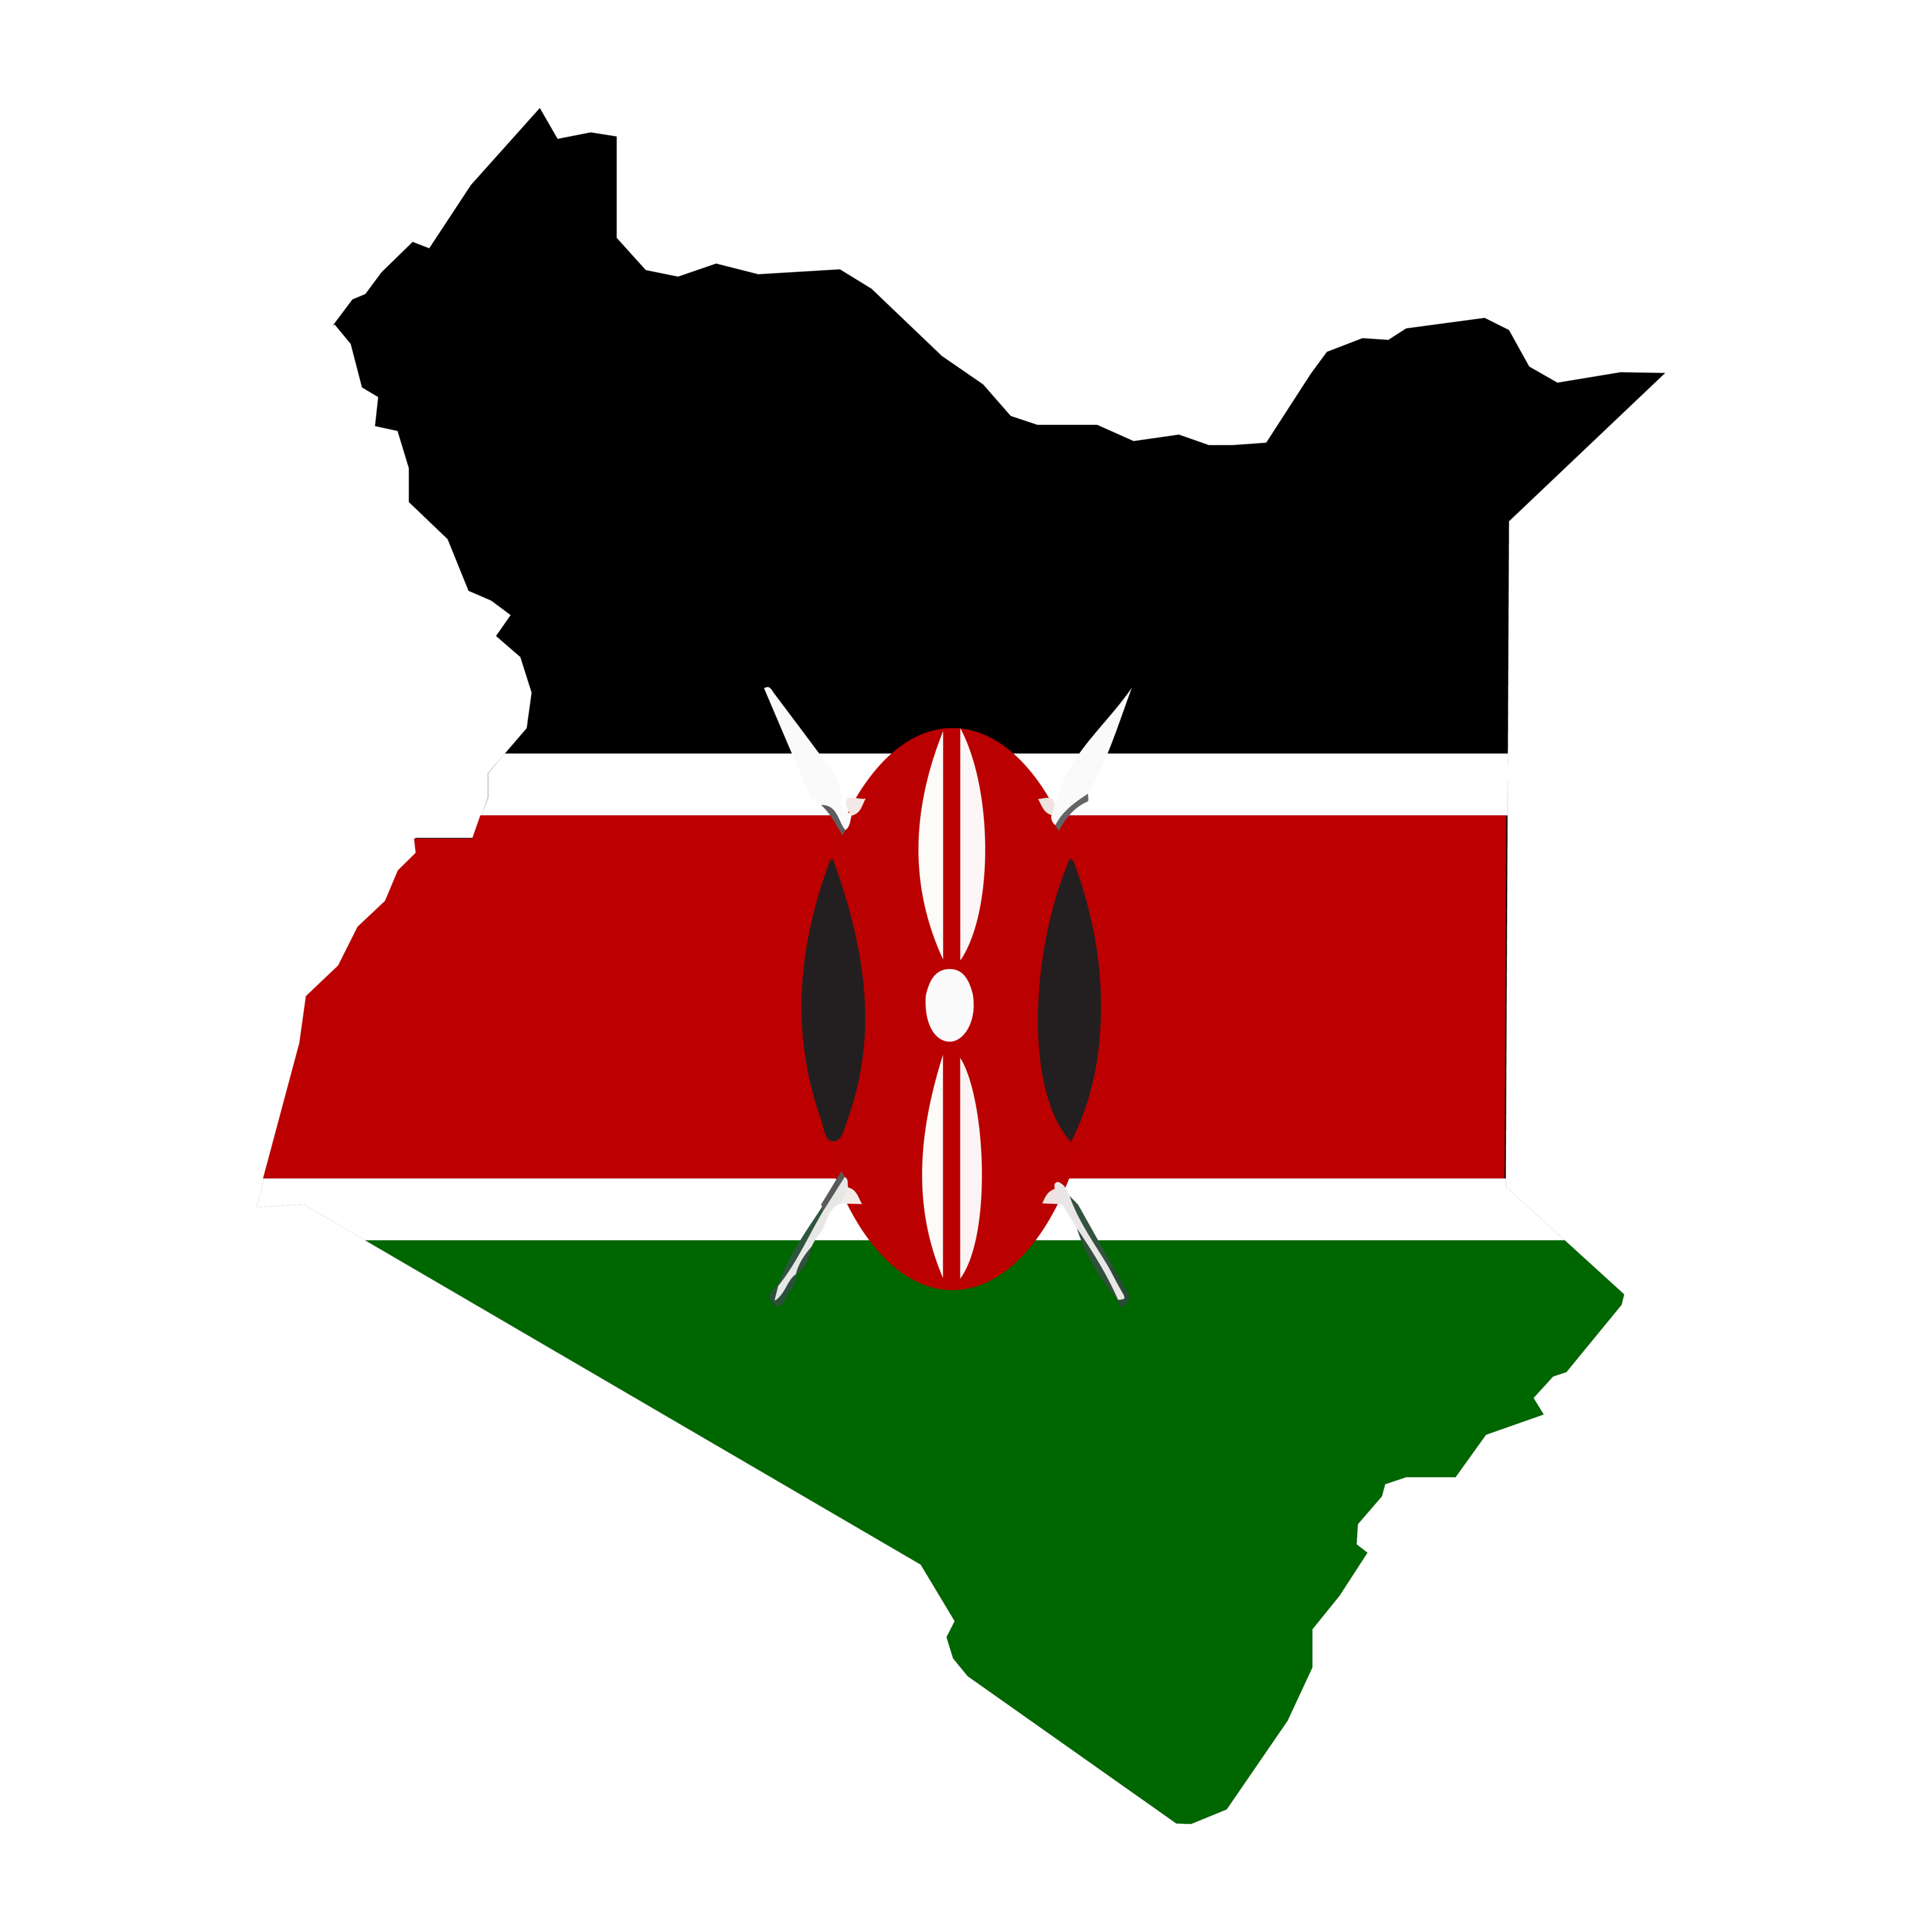 Kenya map and flag in white background